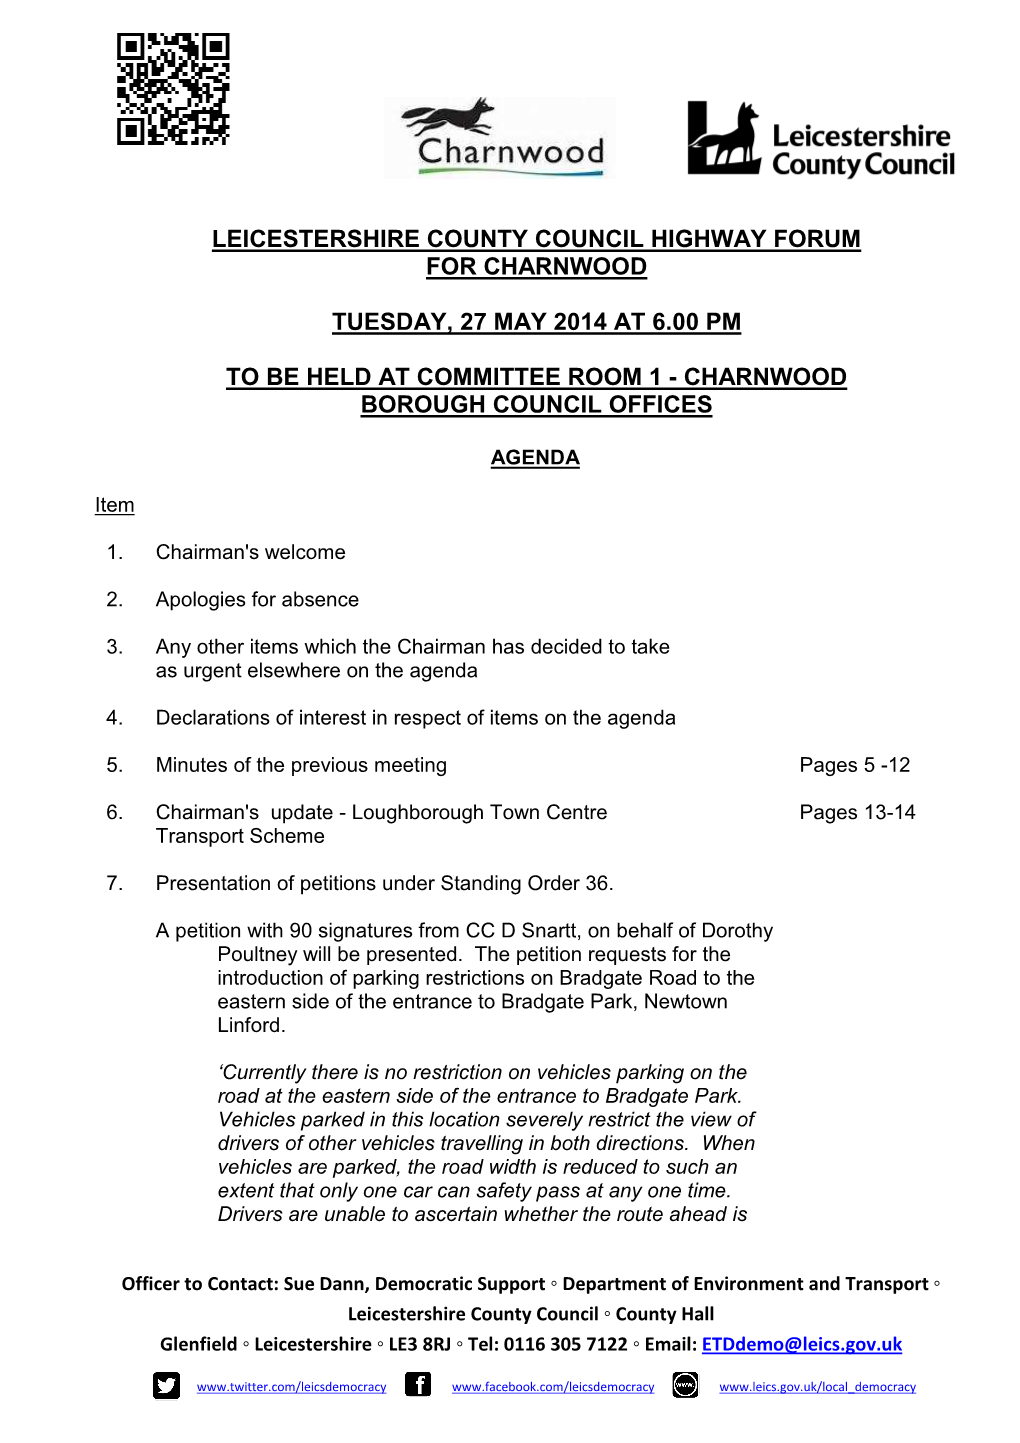 Leicestershire County Council Highway Forum for Charnwood Tuesday